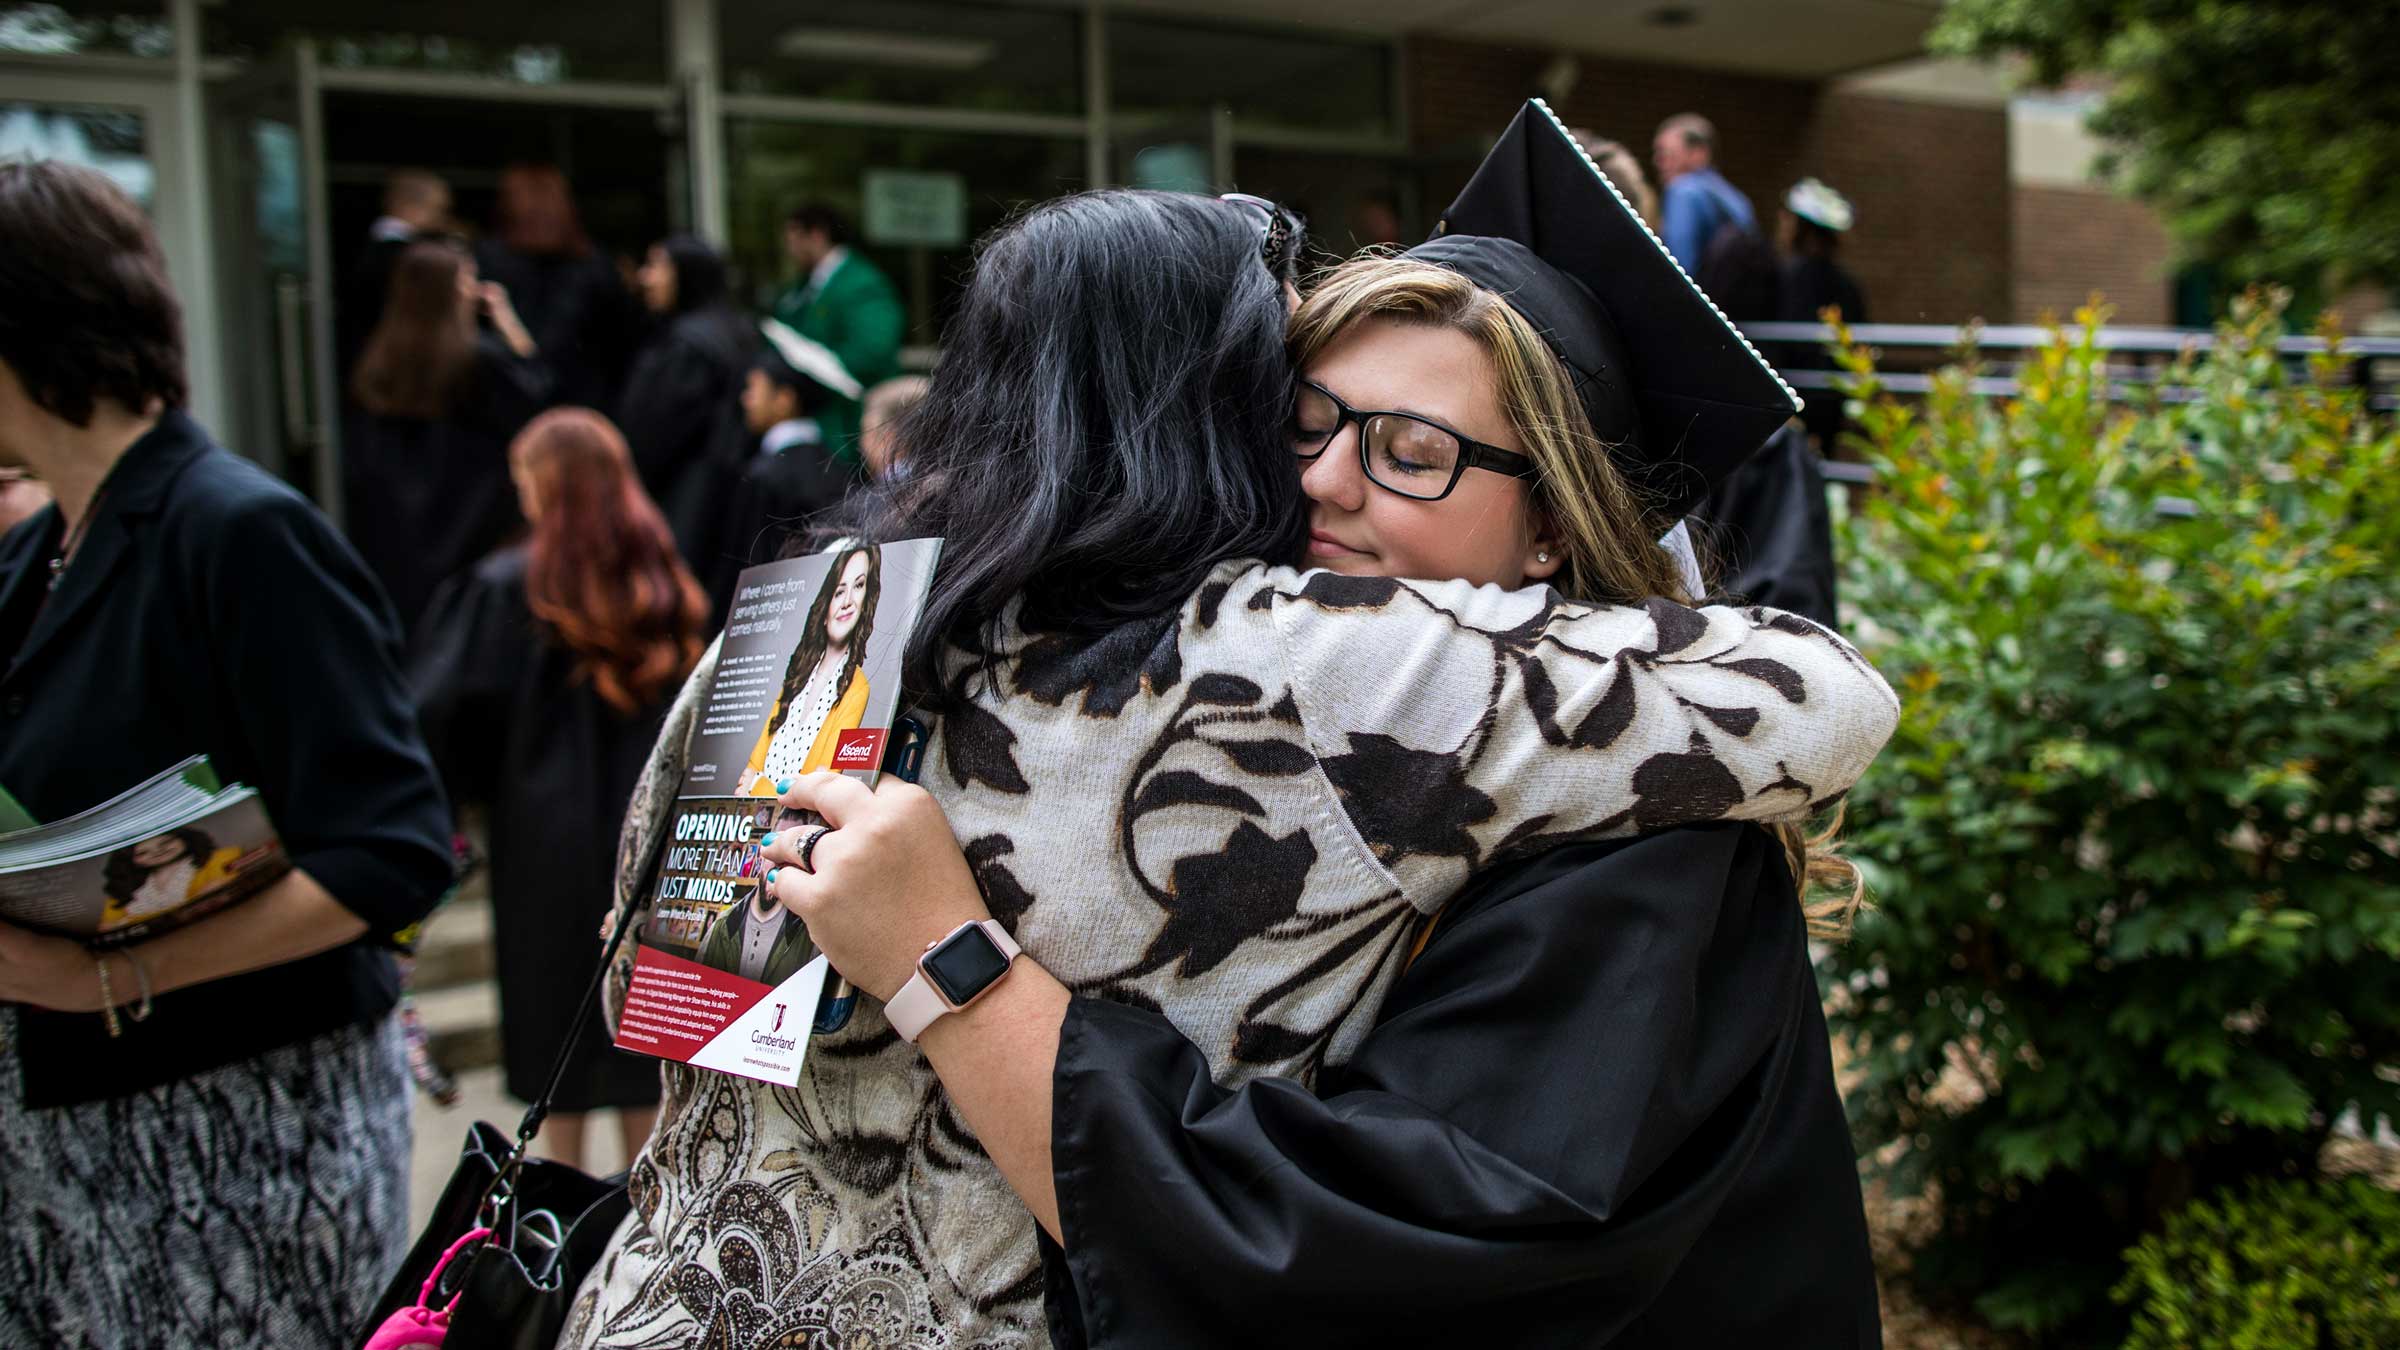 Free tuition is now part of the national conversation. For some, like Nicole-Lynn Riel of Tullahoma, Tenn., it worked. In Tennessee, community colleges are free. Riel graduated from Motlow State Community College in May 2017 without debt, worthy of a hug from her mother.